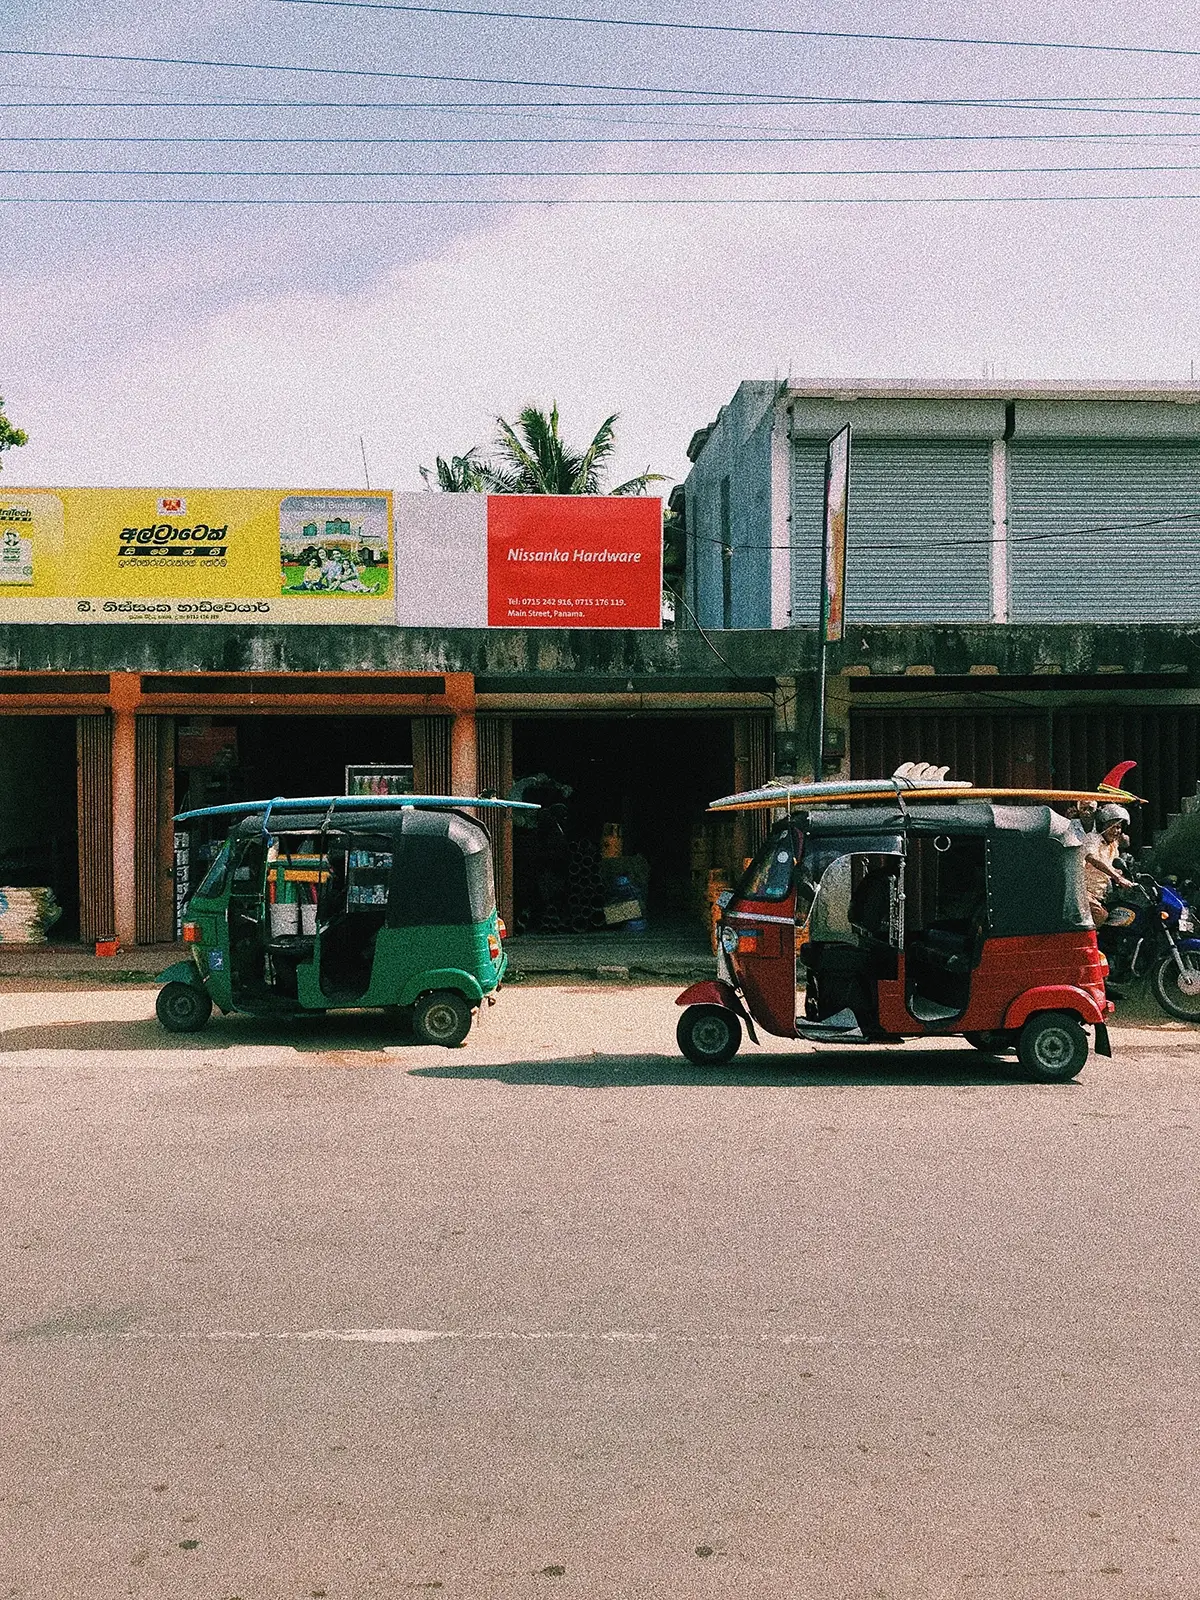 Tuktuk with surfboards on the roof in ceylon